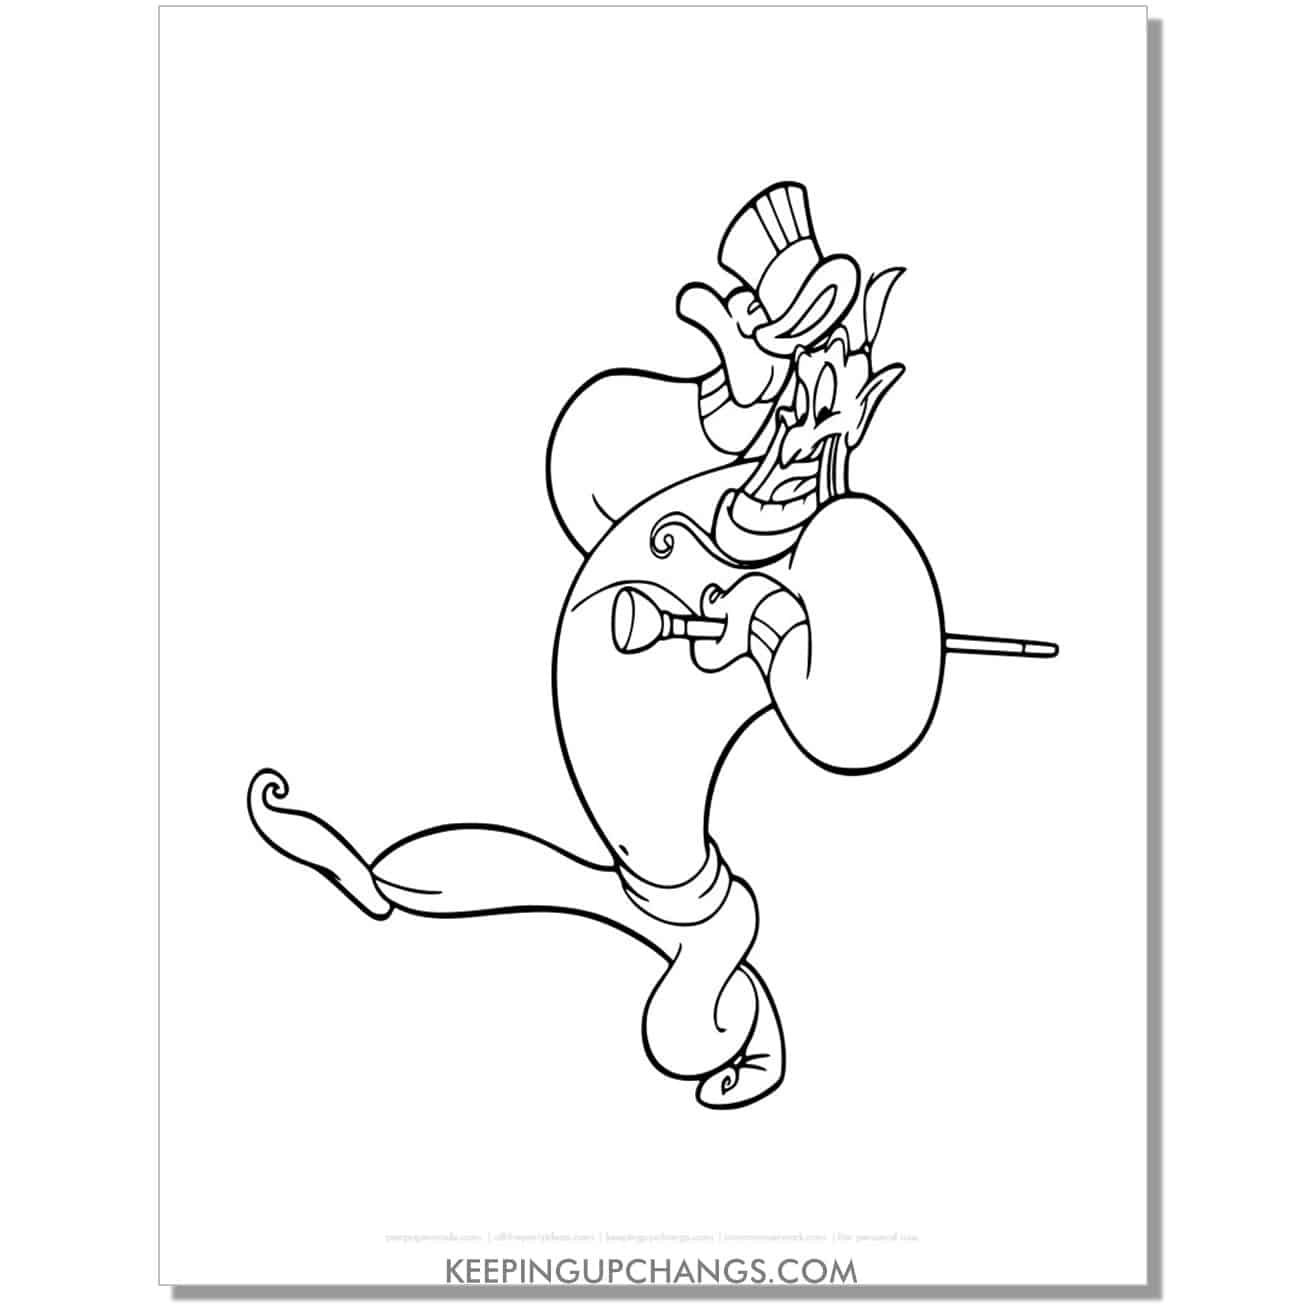 aladdin genie doing dance with hat and stick coloring page, sheet.